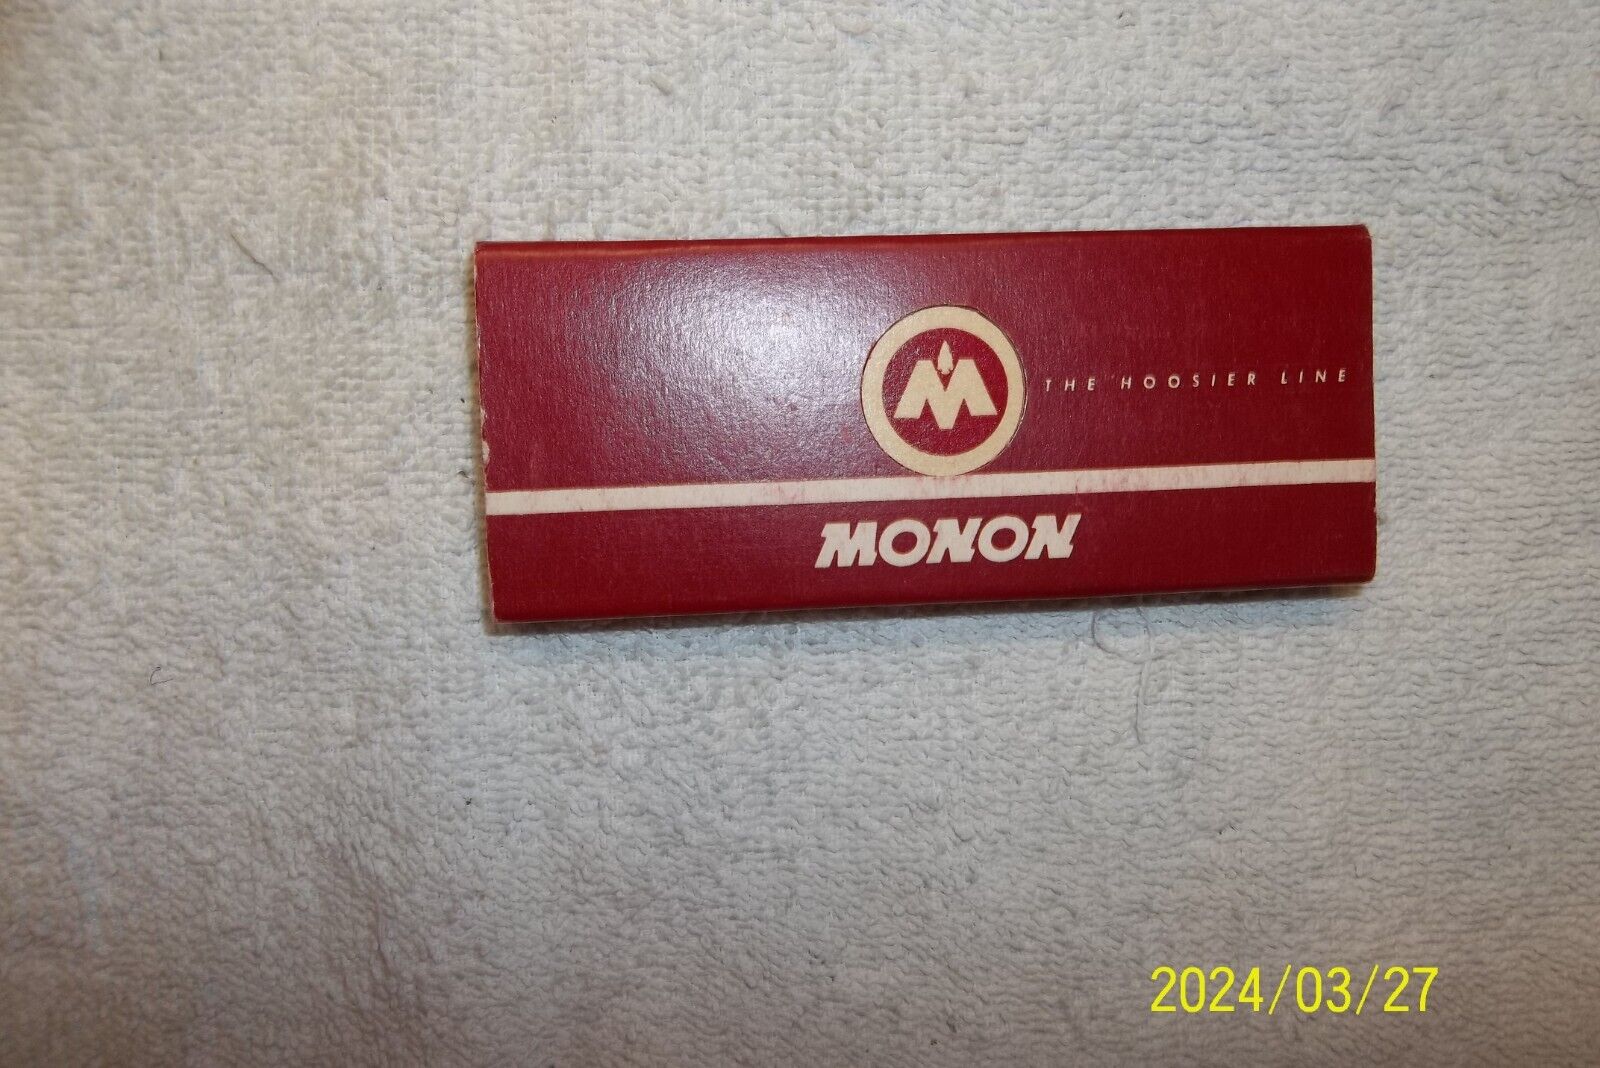 MONON RAILROAD MATCHBOOKS WITH SLEEVE=THE HOOSIER LINE=6 PACKS OF UNUSED MATCHES